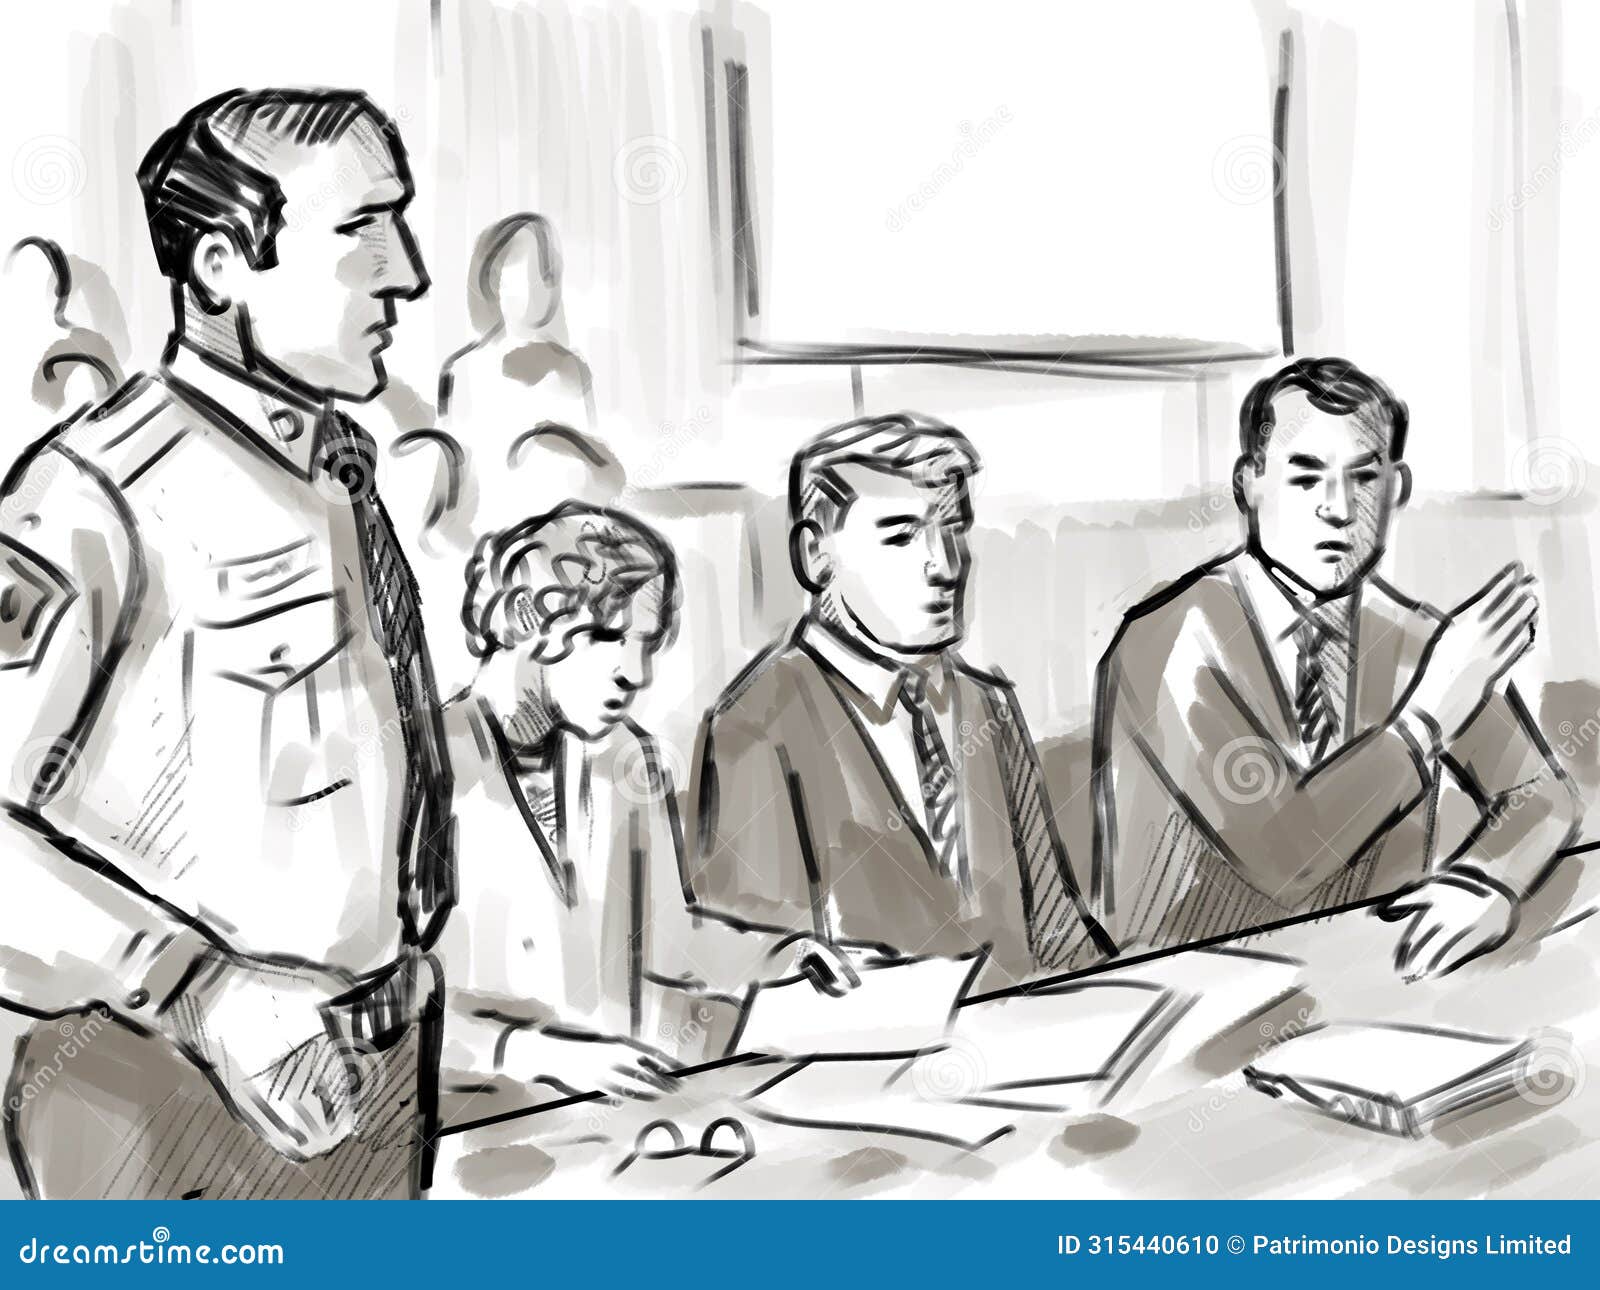 courtroom trial sketch showing lawyer and defendant or plaintiff with bailiff inside court of law drawing